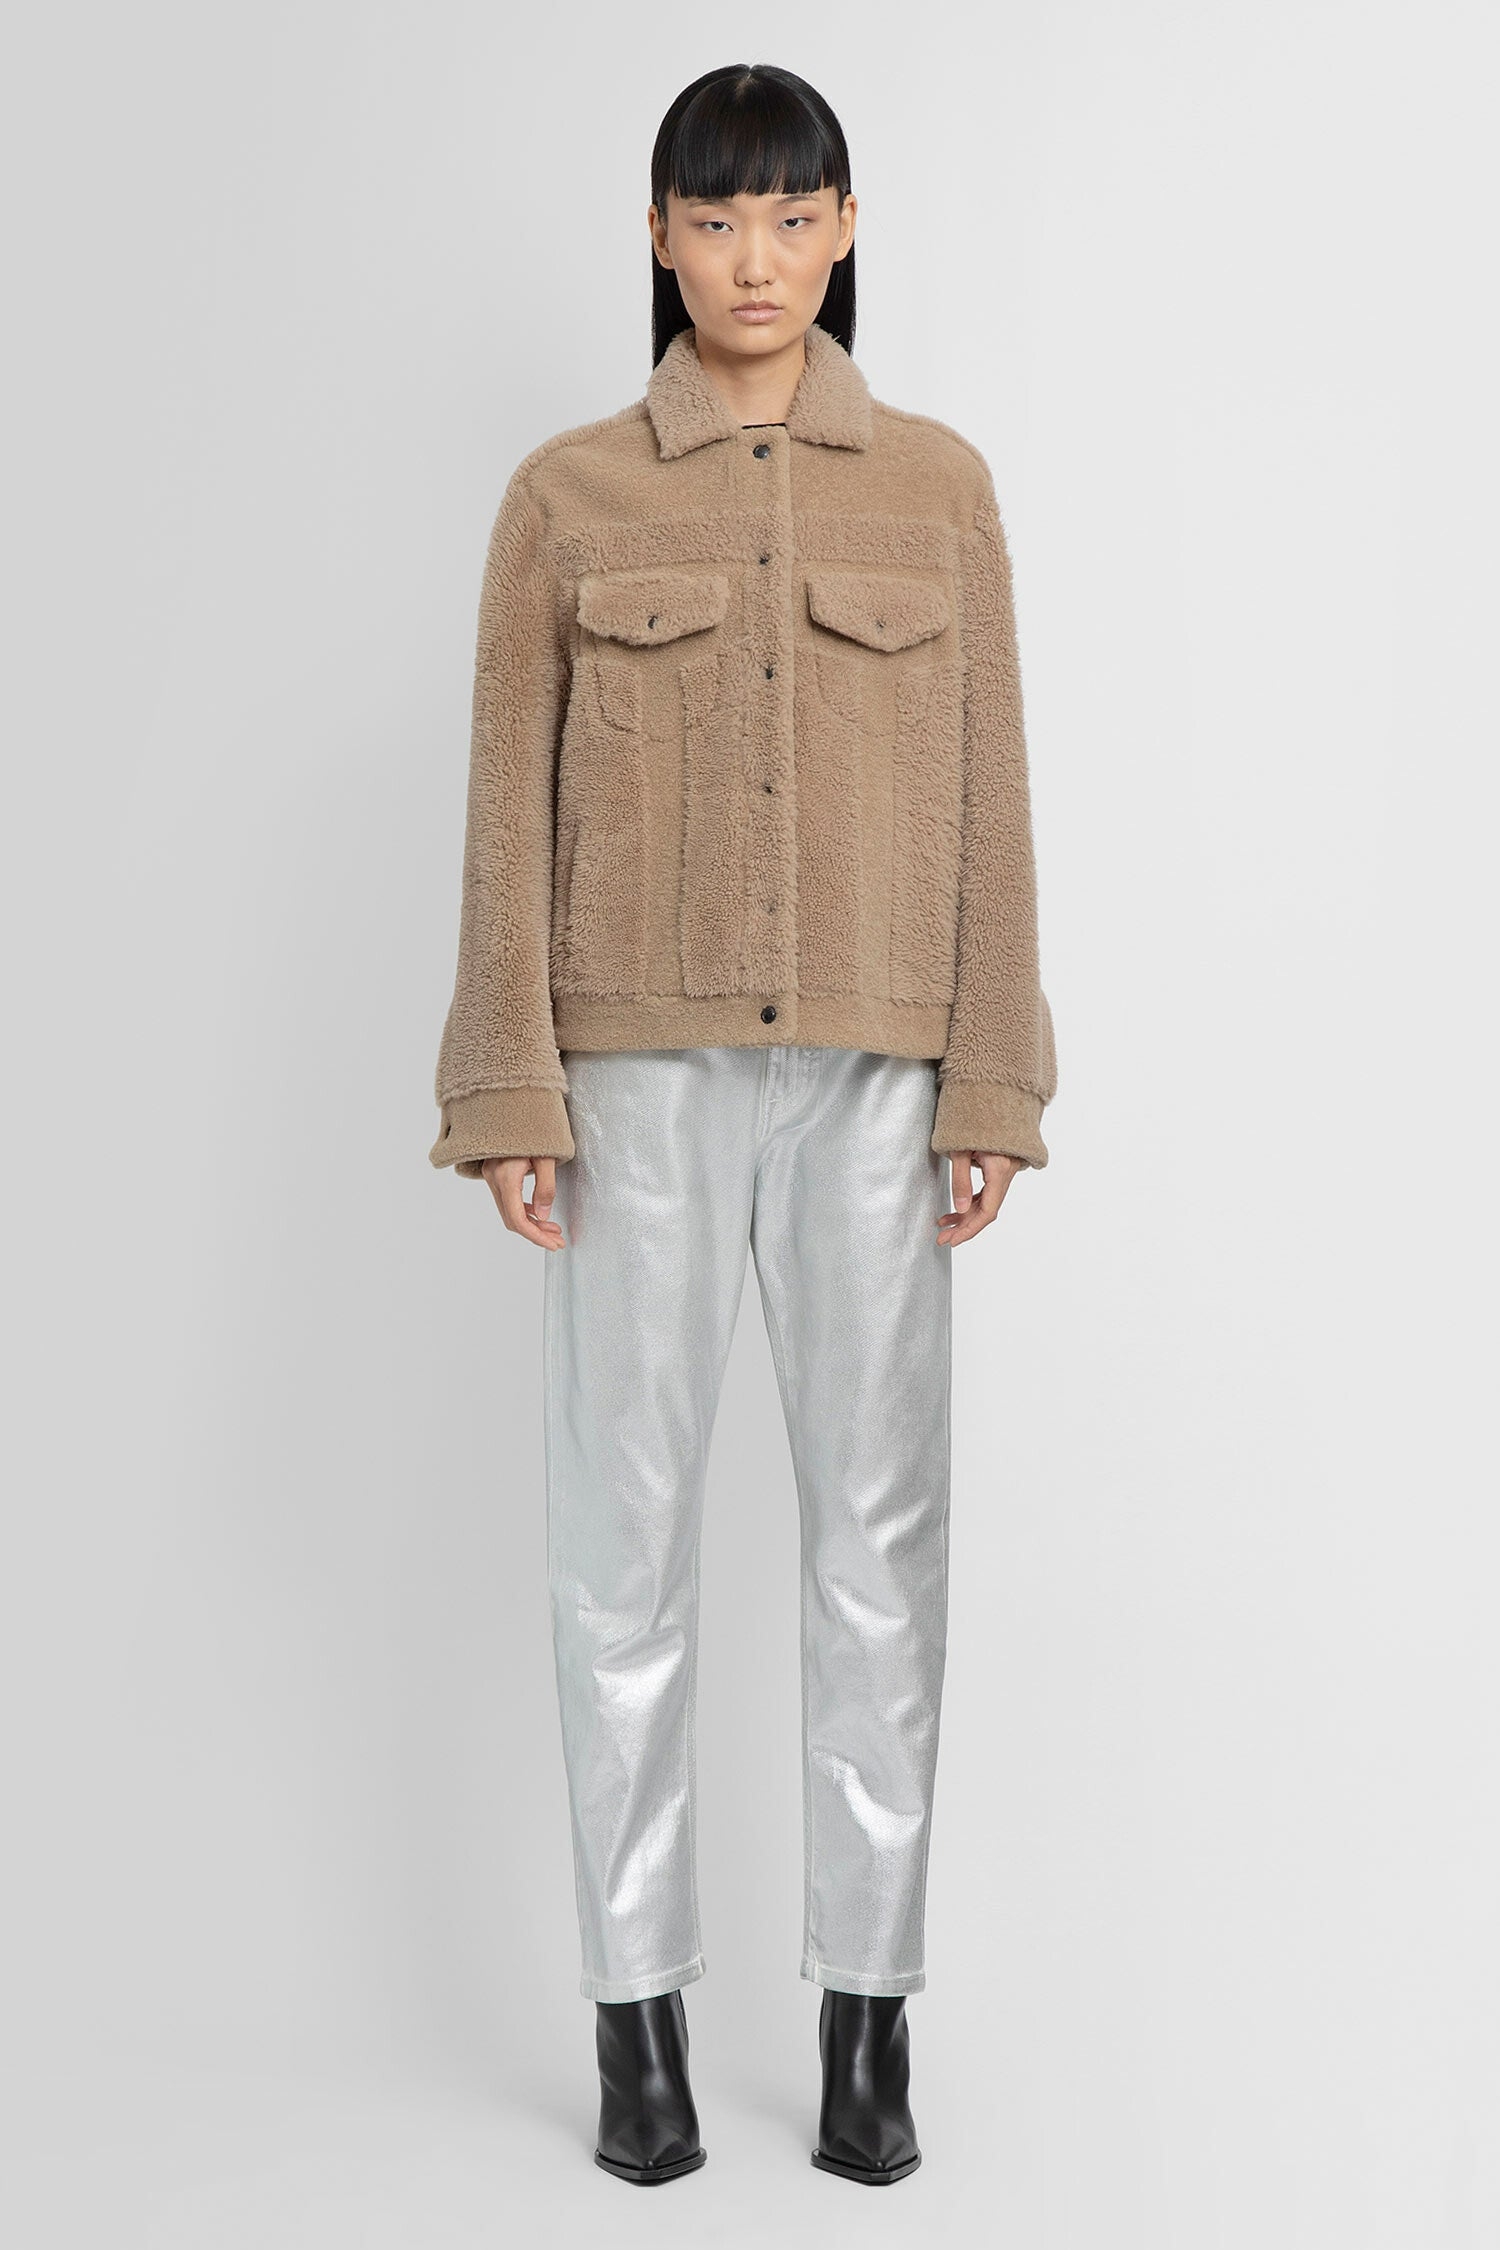 TOM FORD WOMAN BEIGE JACKETS